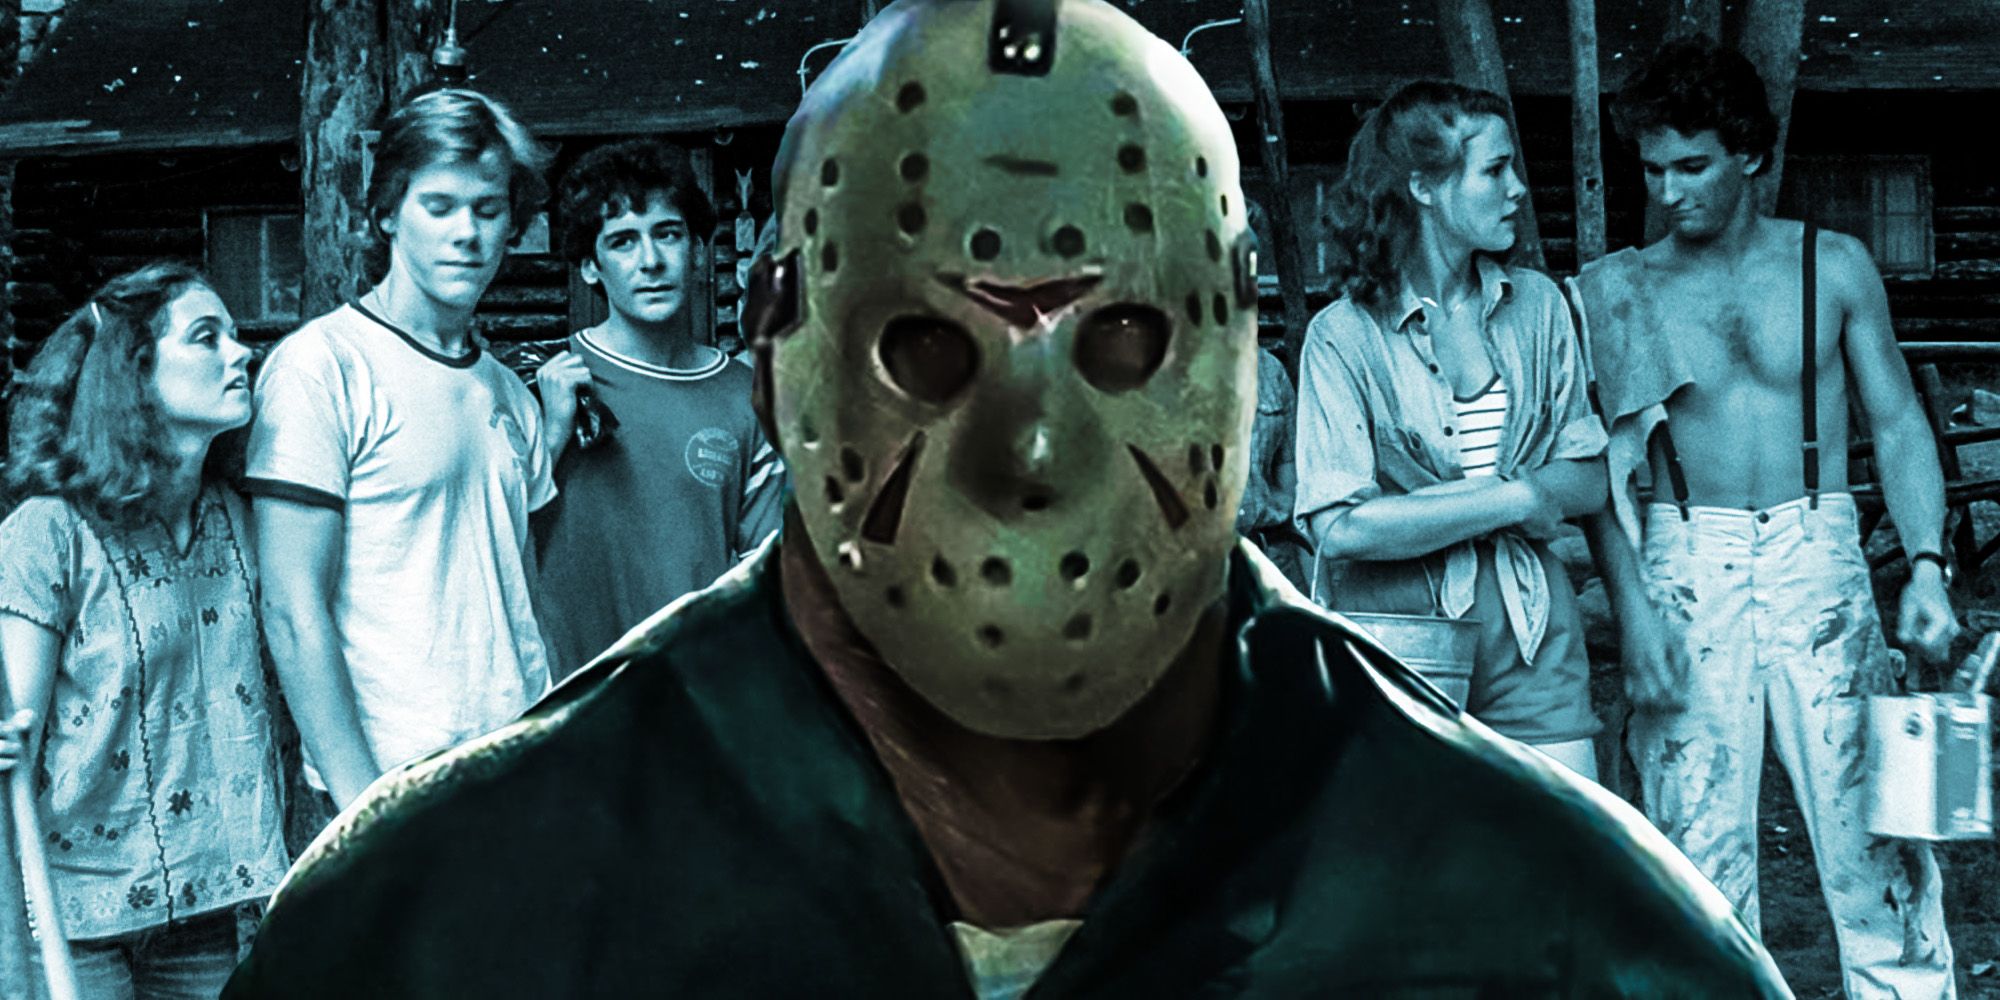 Friday the 13th should try something no slasher reboot has attempted